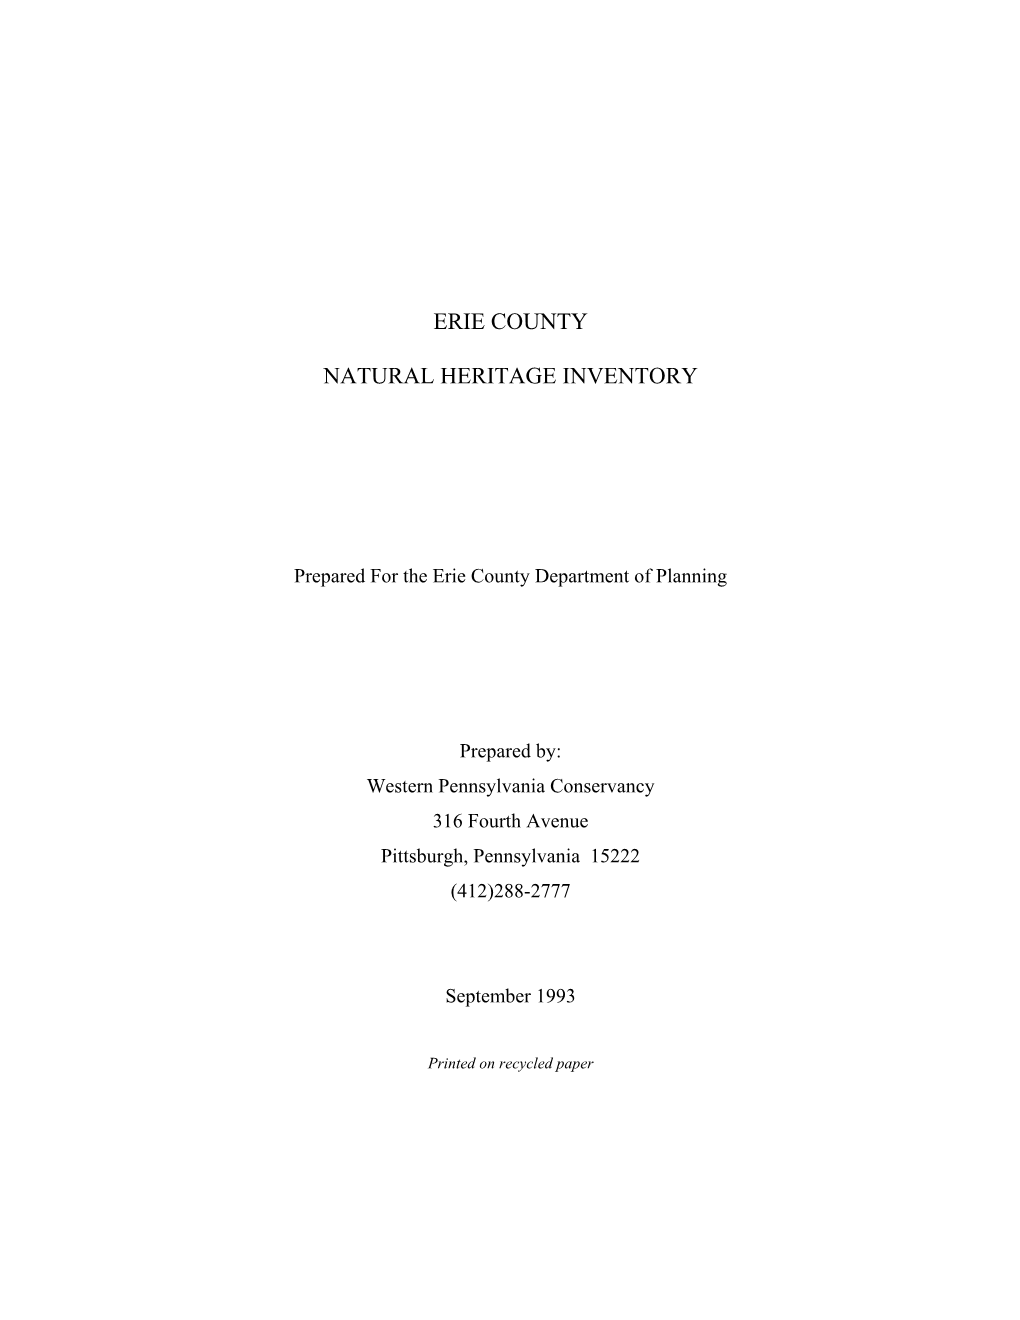 Eire County Natural Heritage Inventory, 1993